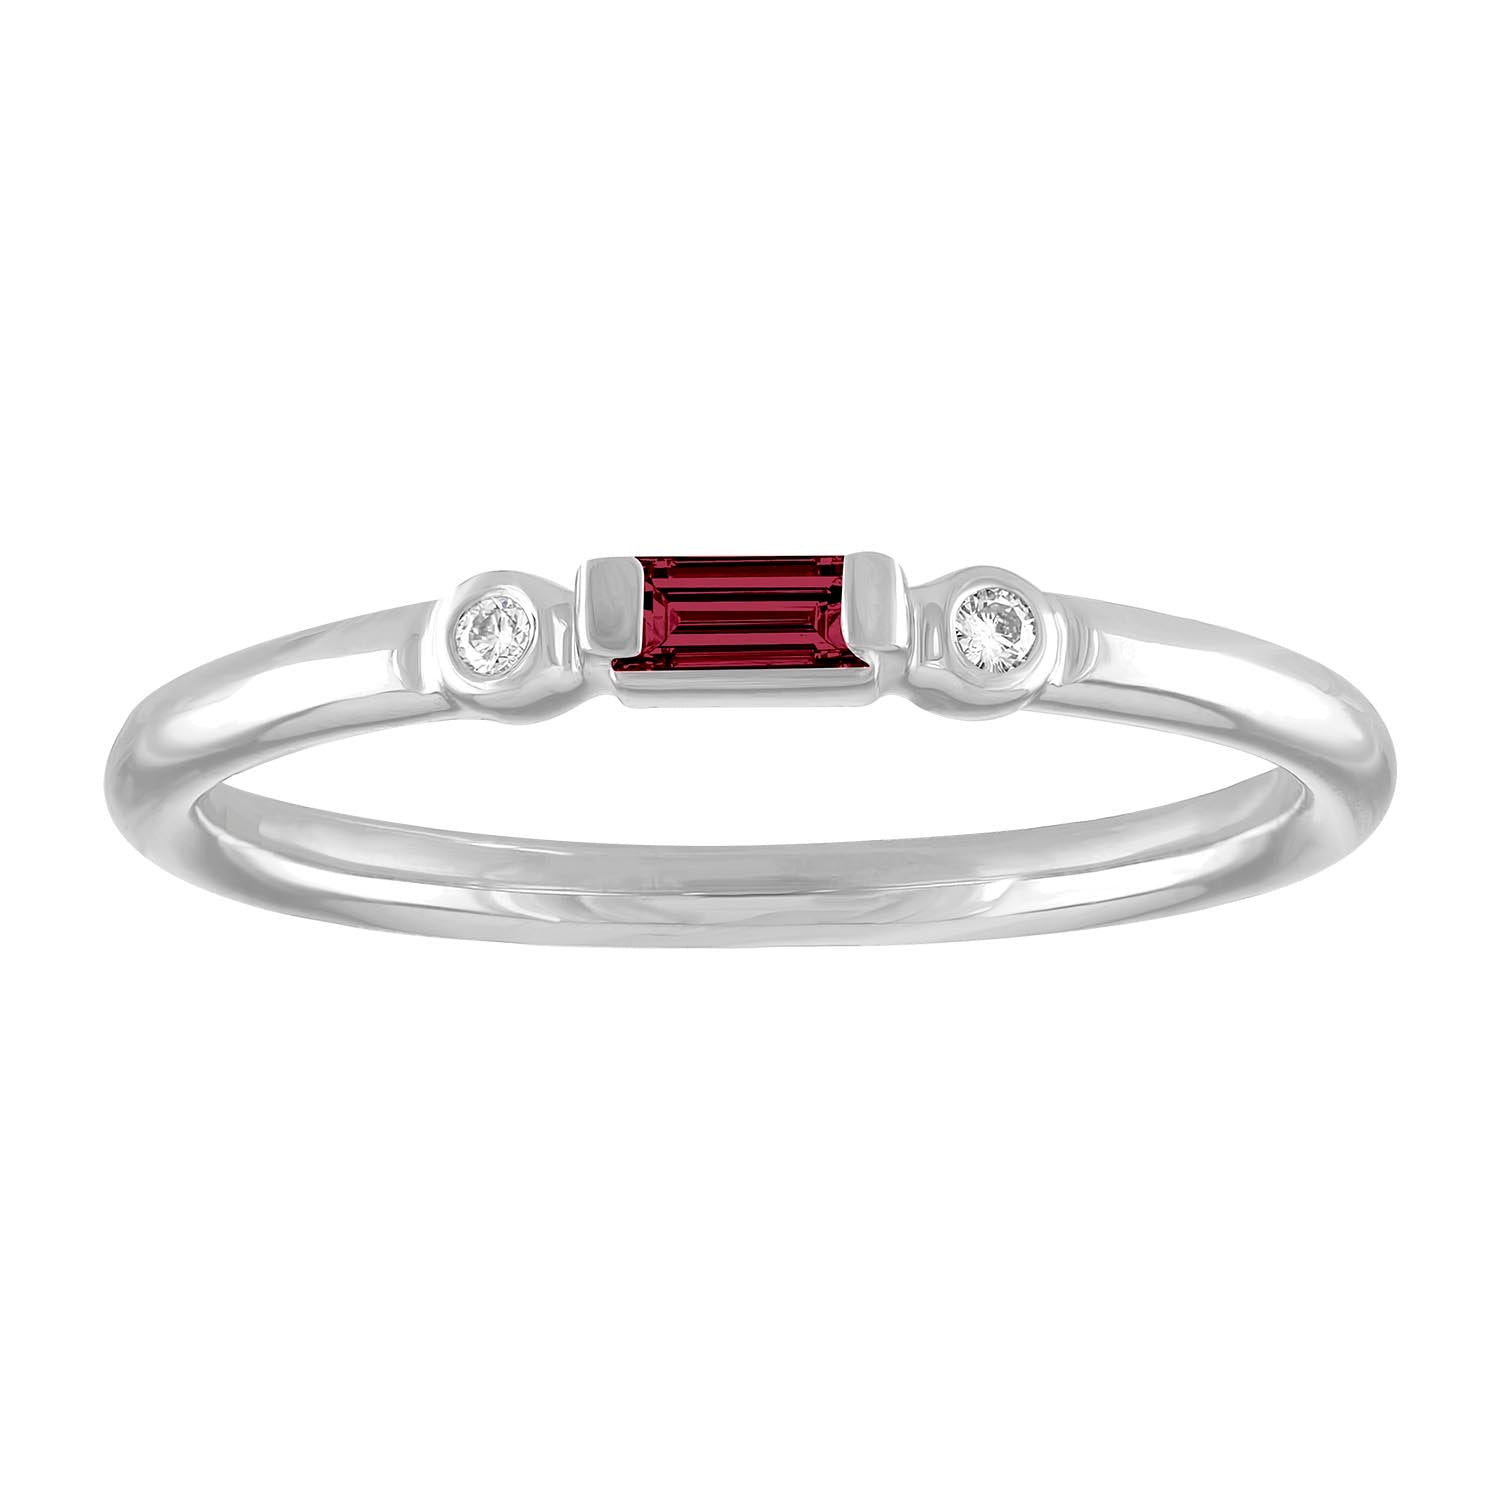 White gold skinny band with a garnet baguette in the center and two round diamonds on the side. 